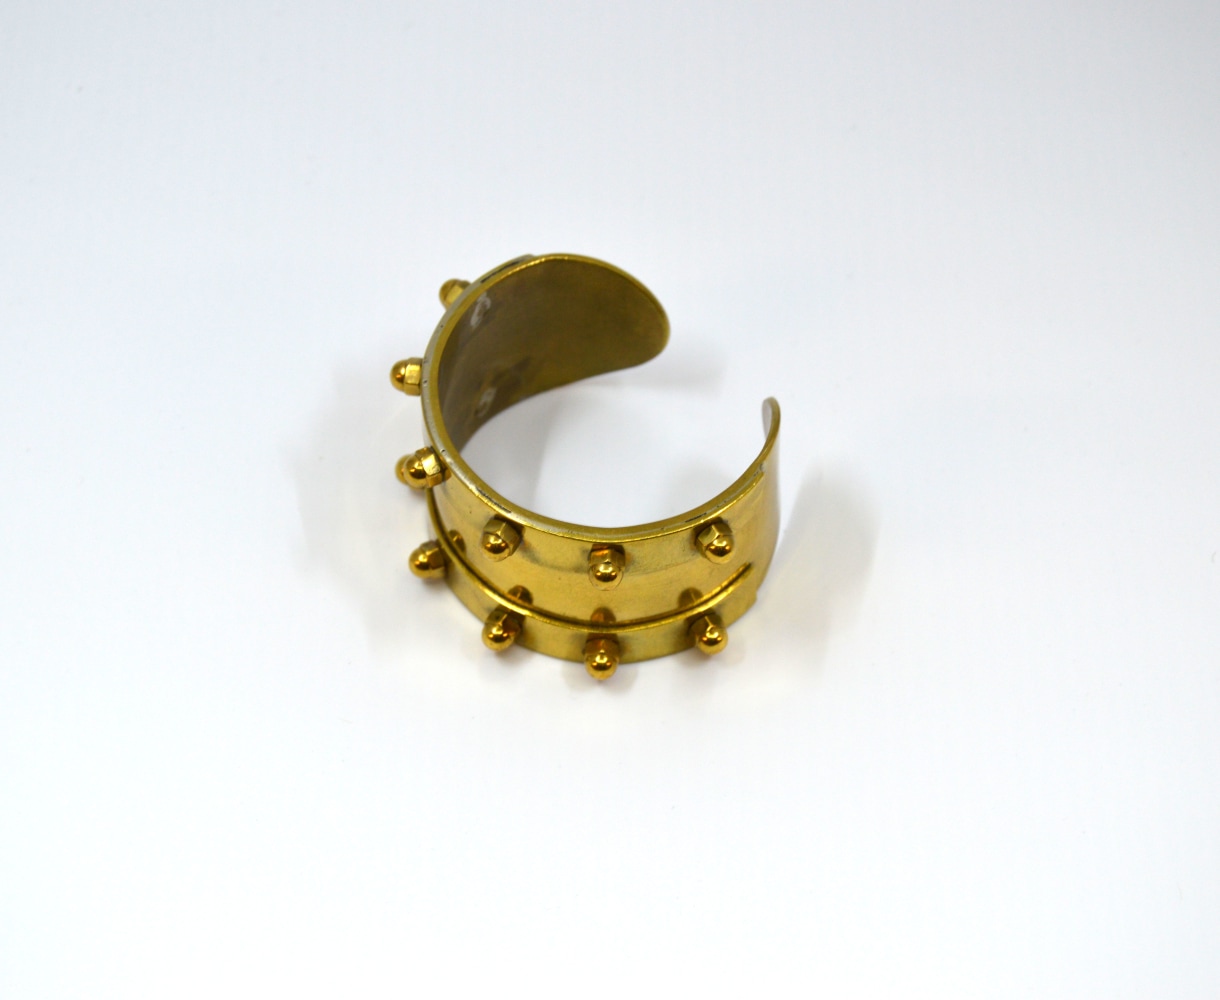 Amanda Kaiserman, Gladiator Cuff  one size  Brass Hardware, Acorn Nuts, All Made By Hand And Hand Polished